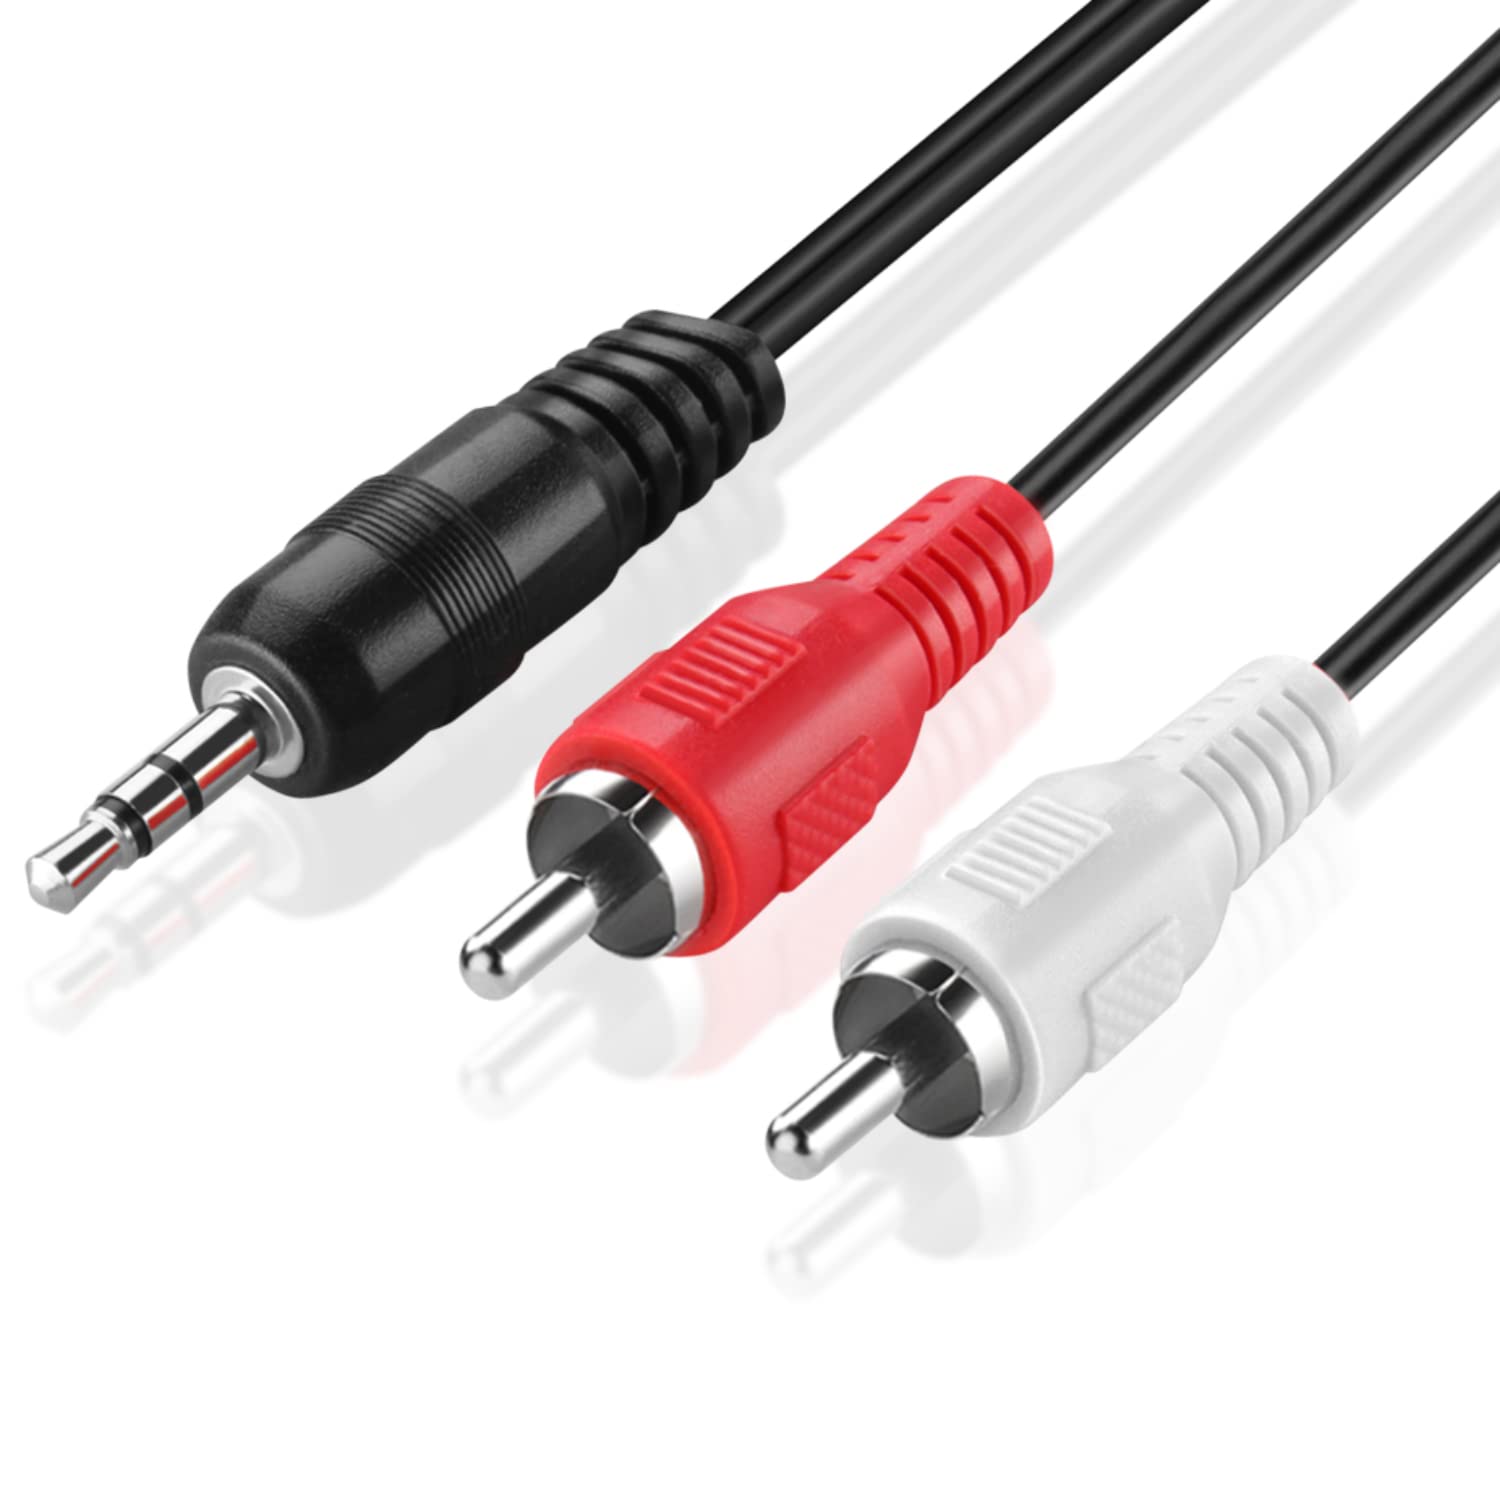 Verify that the audio cable is securely plugged into the correct audio jack.
Try using a different audio cable to rule out any potential cable issues.